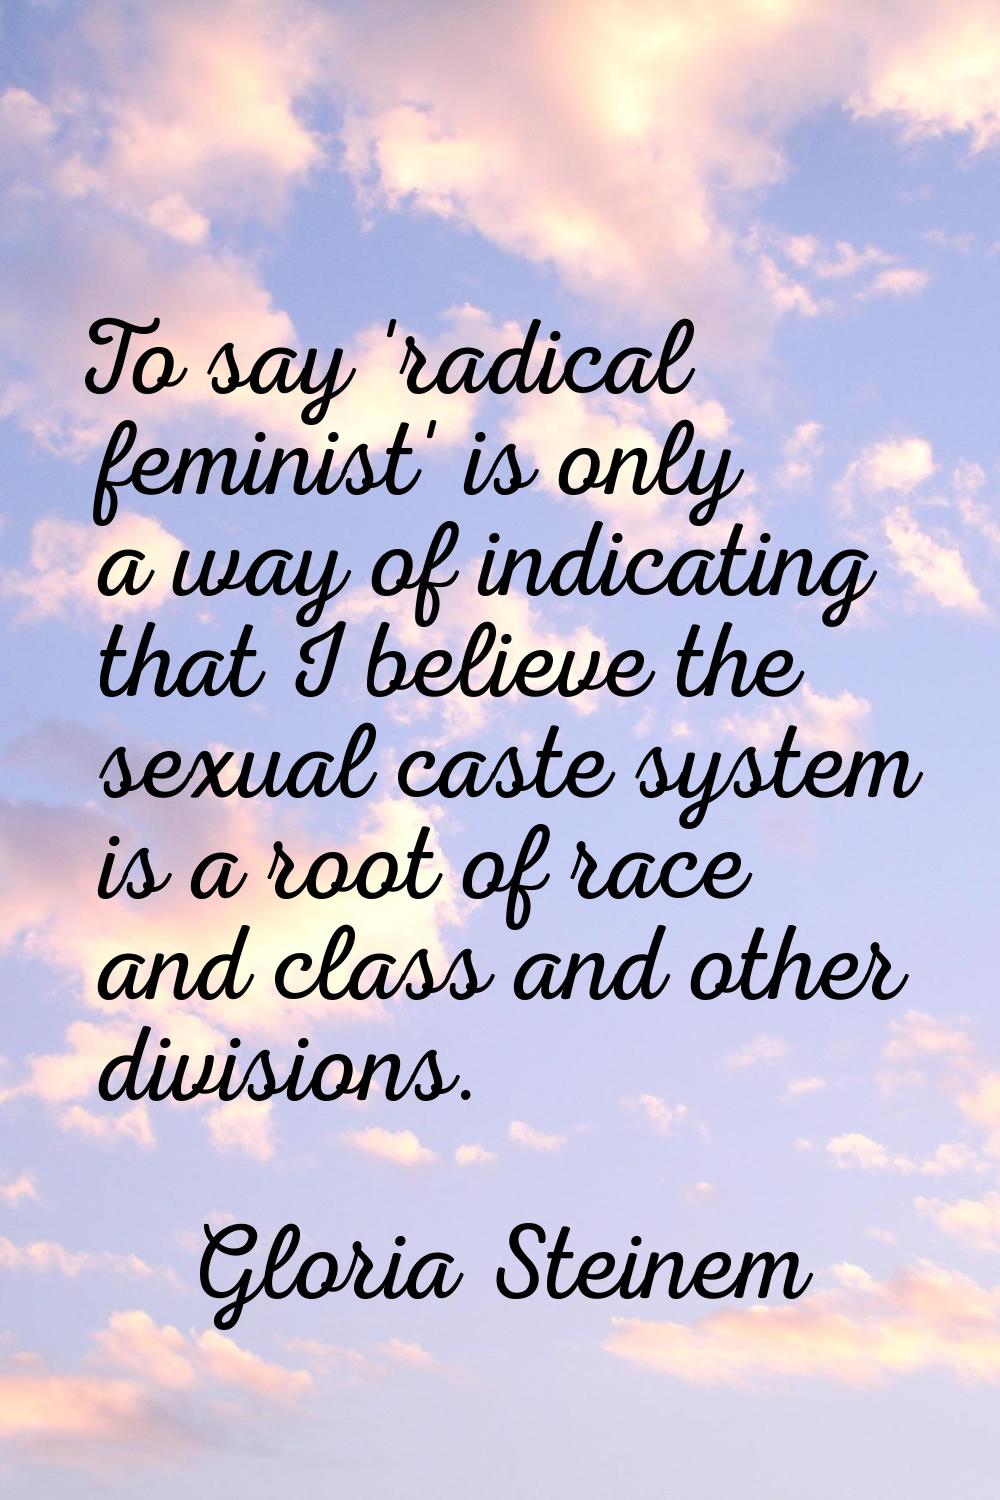 To say 'radical feminist' is only a way of indicating that I believe the sexual caste system is a r